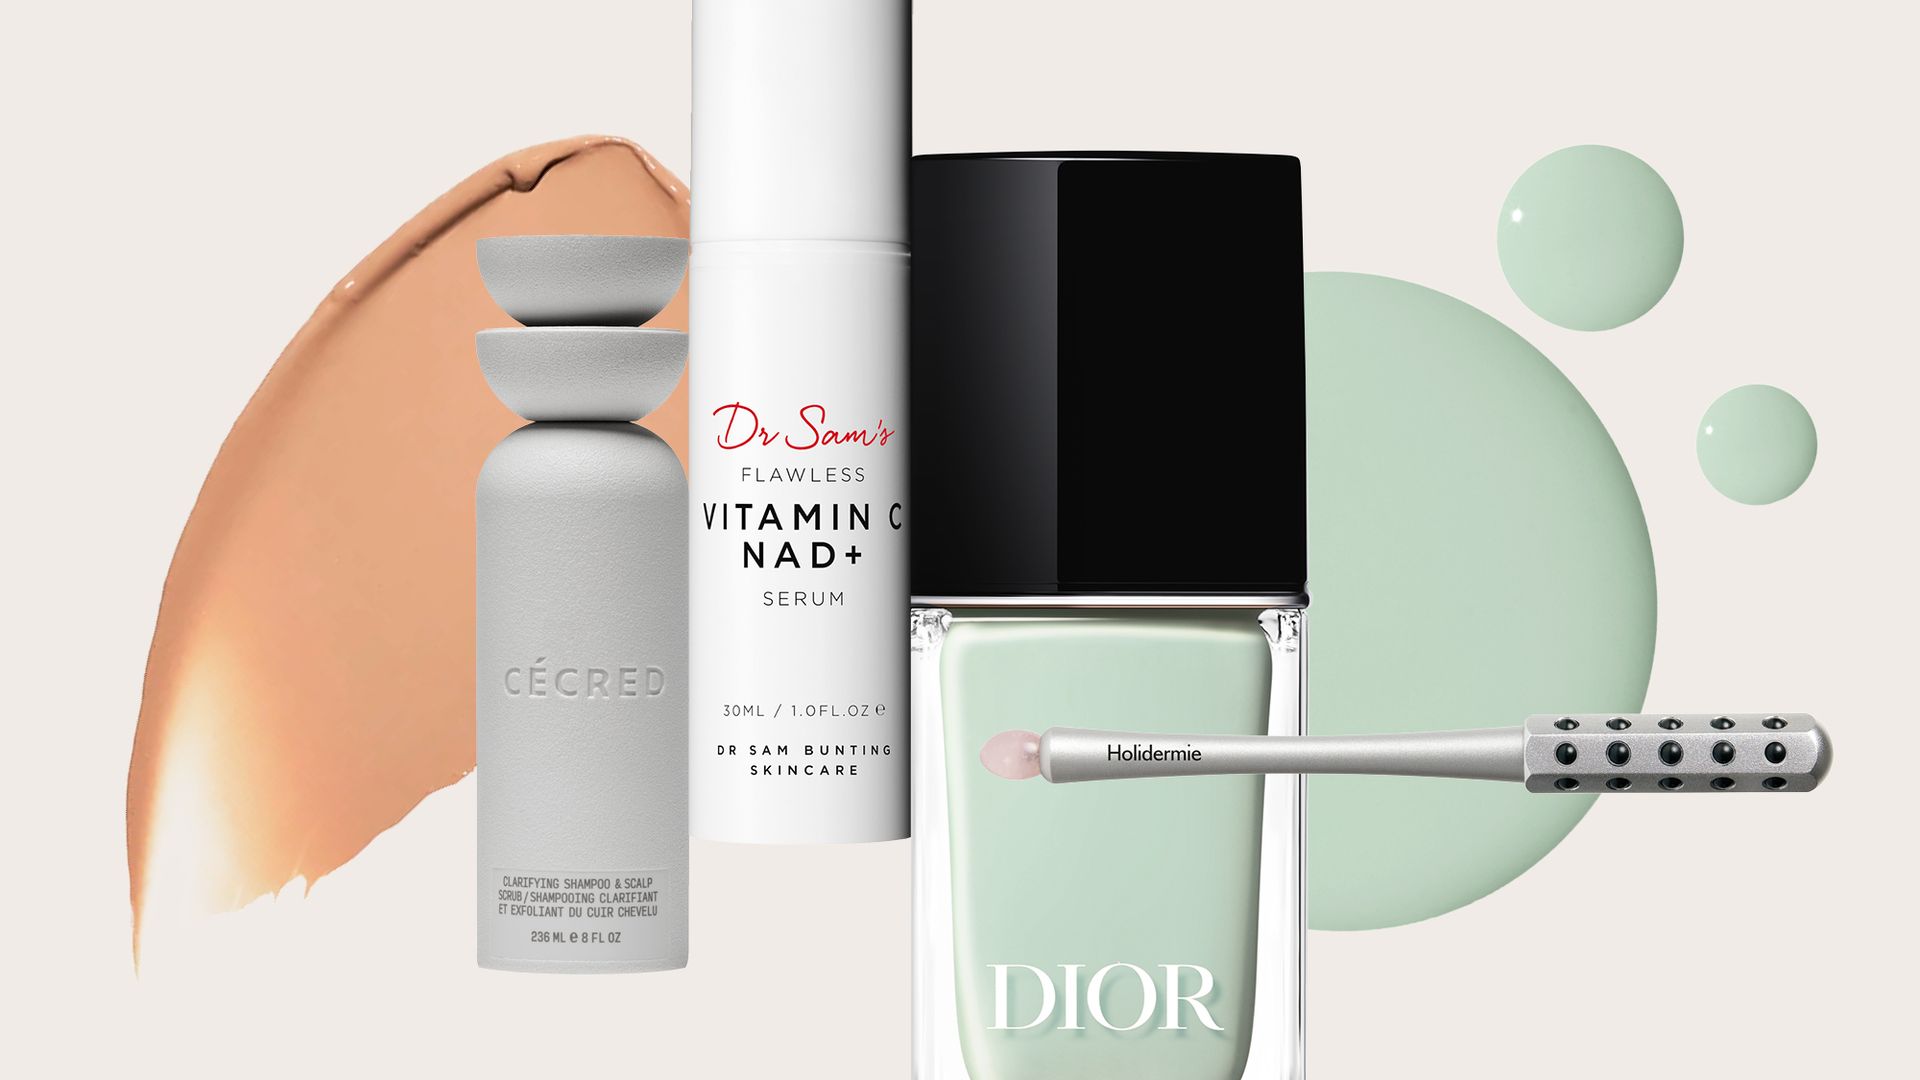 Most Wanted: The 5 products our Beauty Director is swooning over this week